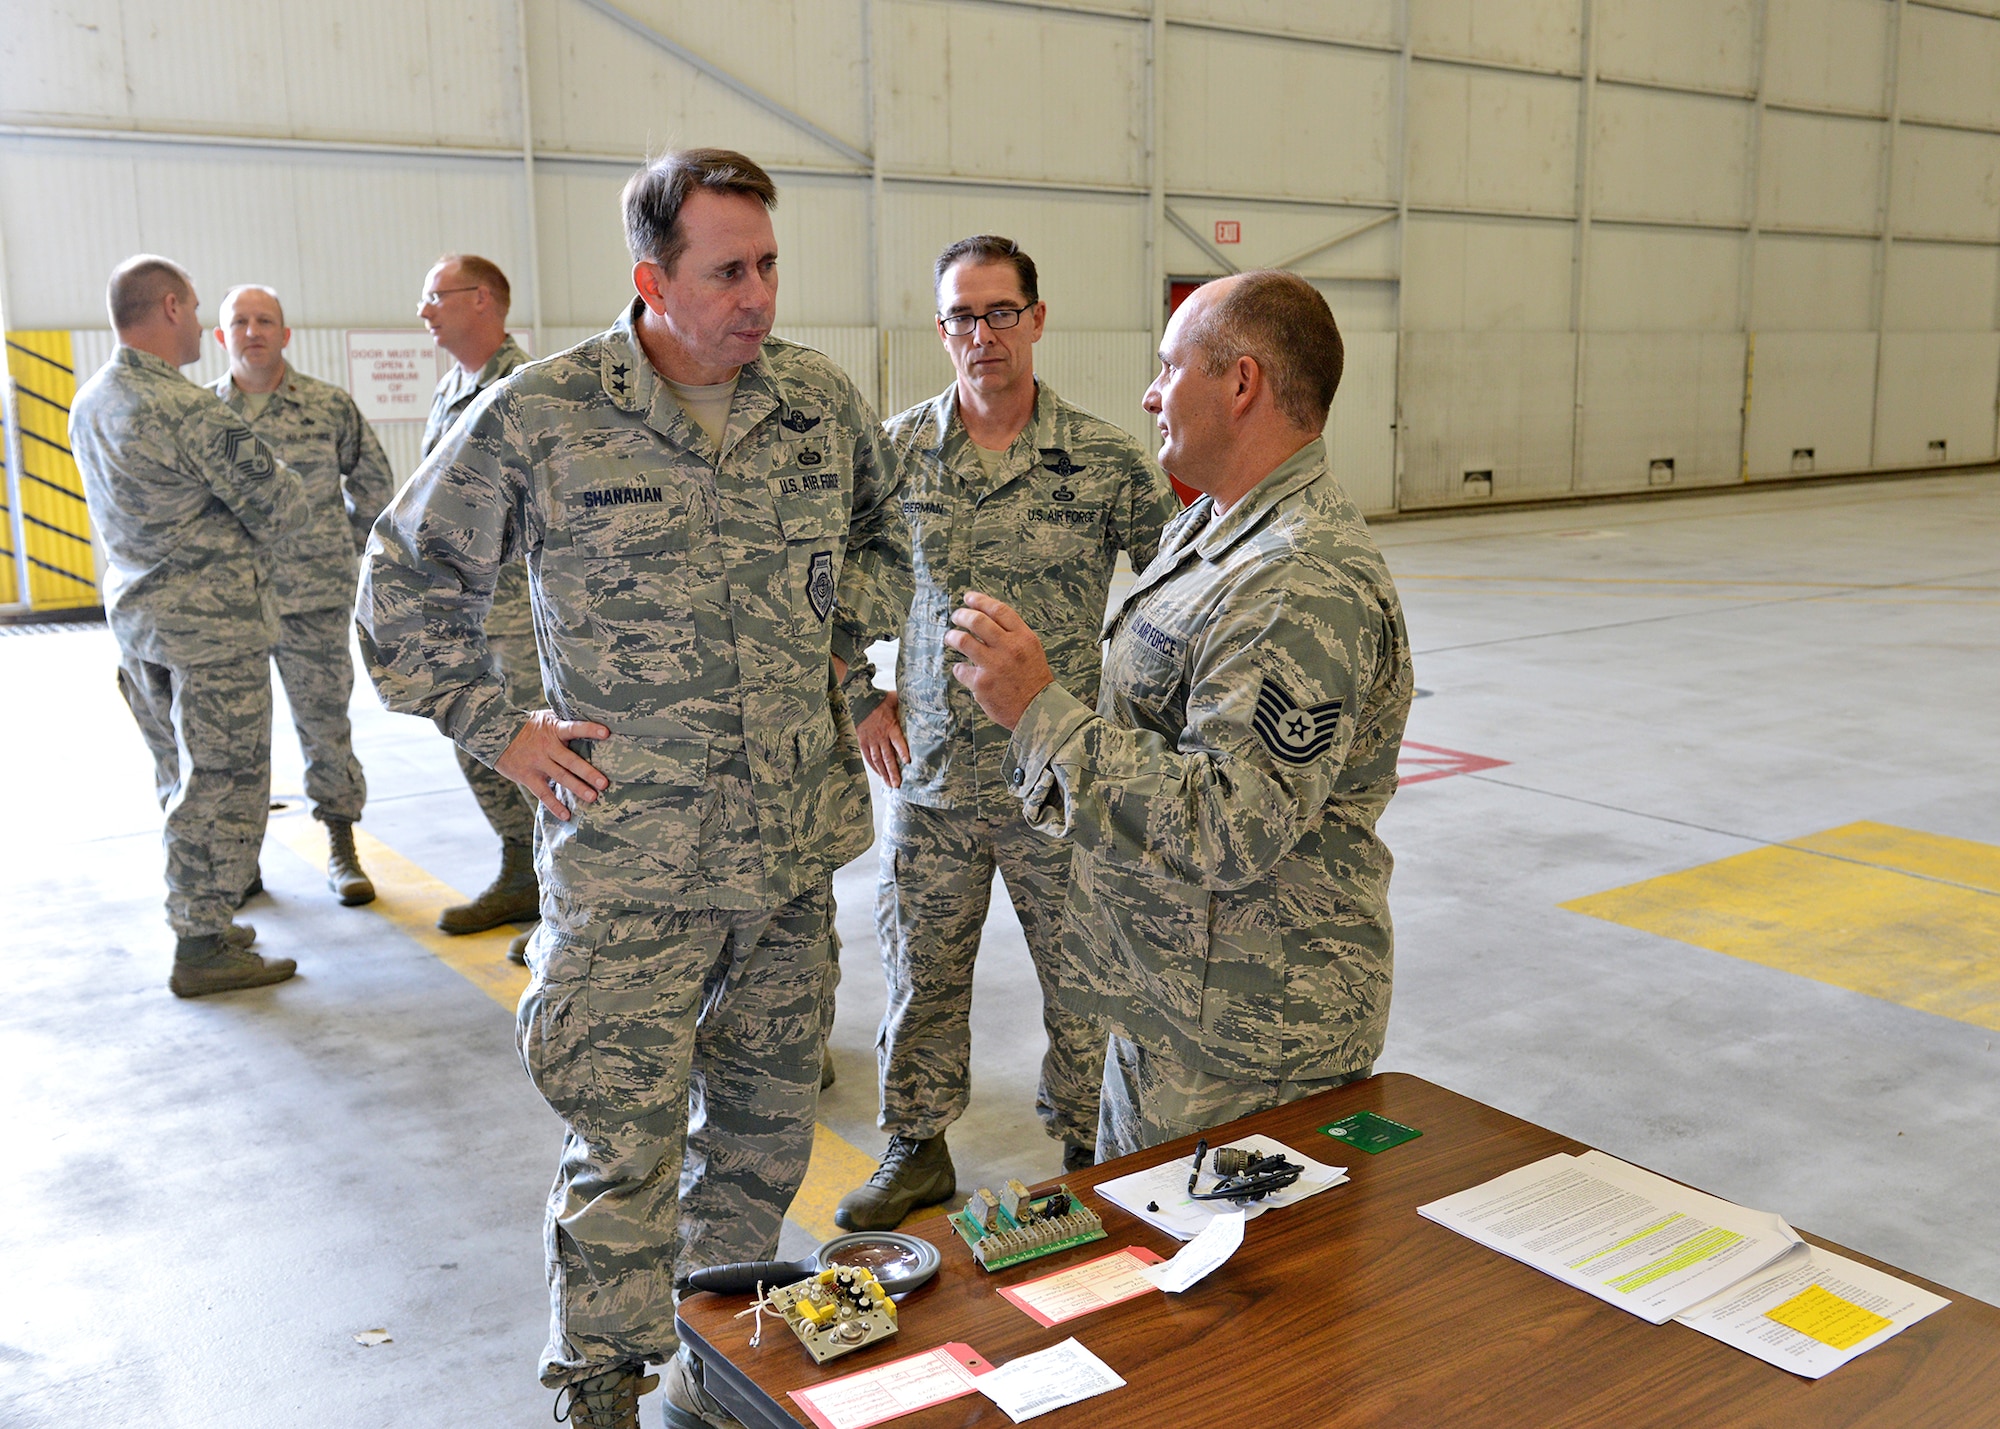 (Right) Tech. Sgt. Kevin Marshall talks to Maj. Gen. John Shanahan (left), 25th Air Force commander, and Chief Master Sgt. Roger Towberman, 25th AF command chief, about the contributions the 9th Reconnaissance Wing has made to the Air Force Repair Enhancement Program at Beale Air Force Base, Calif., Oct. 15, 2014. Shanahan and Towberman visited Beale for the first time since the Sept. 29 re-alignment of the 9th RW to the 25th AF. (U.S Air Force photo by John Schwab/Released)